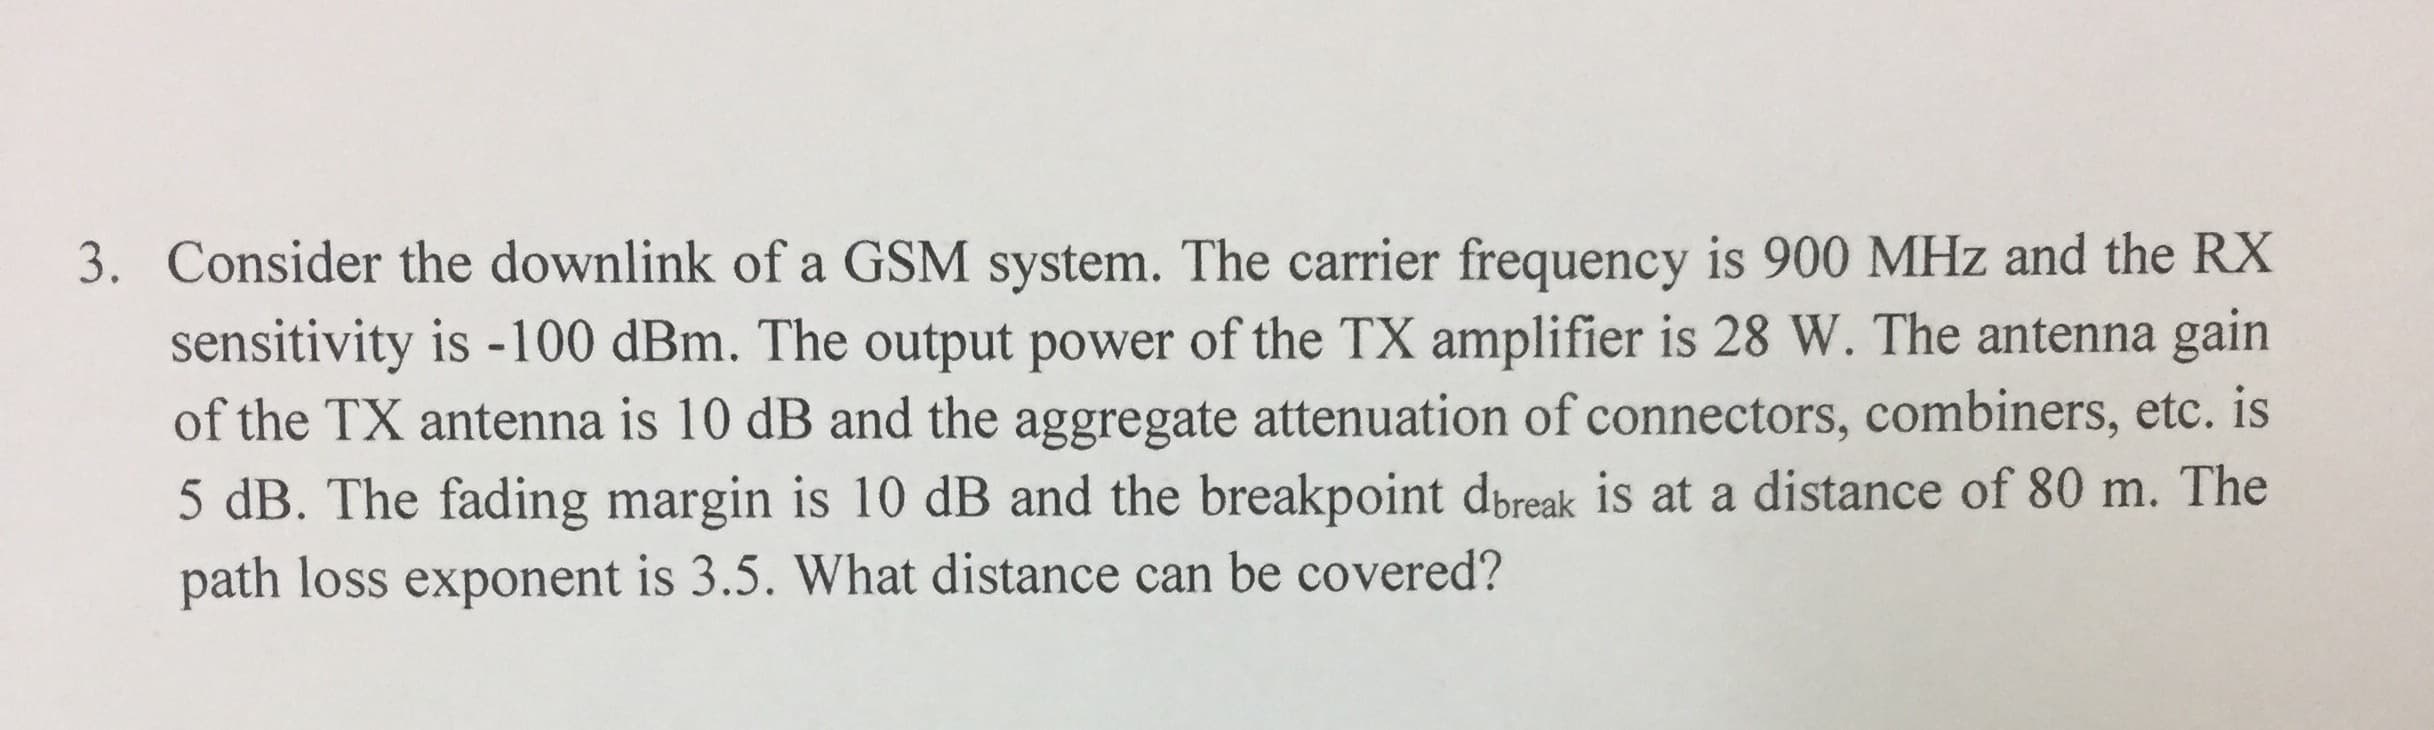 3. Consider the downlink of a GSM system. The carrier frequency is 900 MHz and the RX
sensitivity is -100 dBm. The output power of the TX amplifier is 28 W. The antenna gain
of the TX antenna is 10 dB and the aggregate attenuation of connectors, combiners, etc. is
5 dB. The fading margin is 10 dB and the breakpoint dbreak is at a distance of 80 m. The
path loss exponent is 3.5. What distance can be covered?
